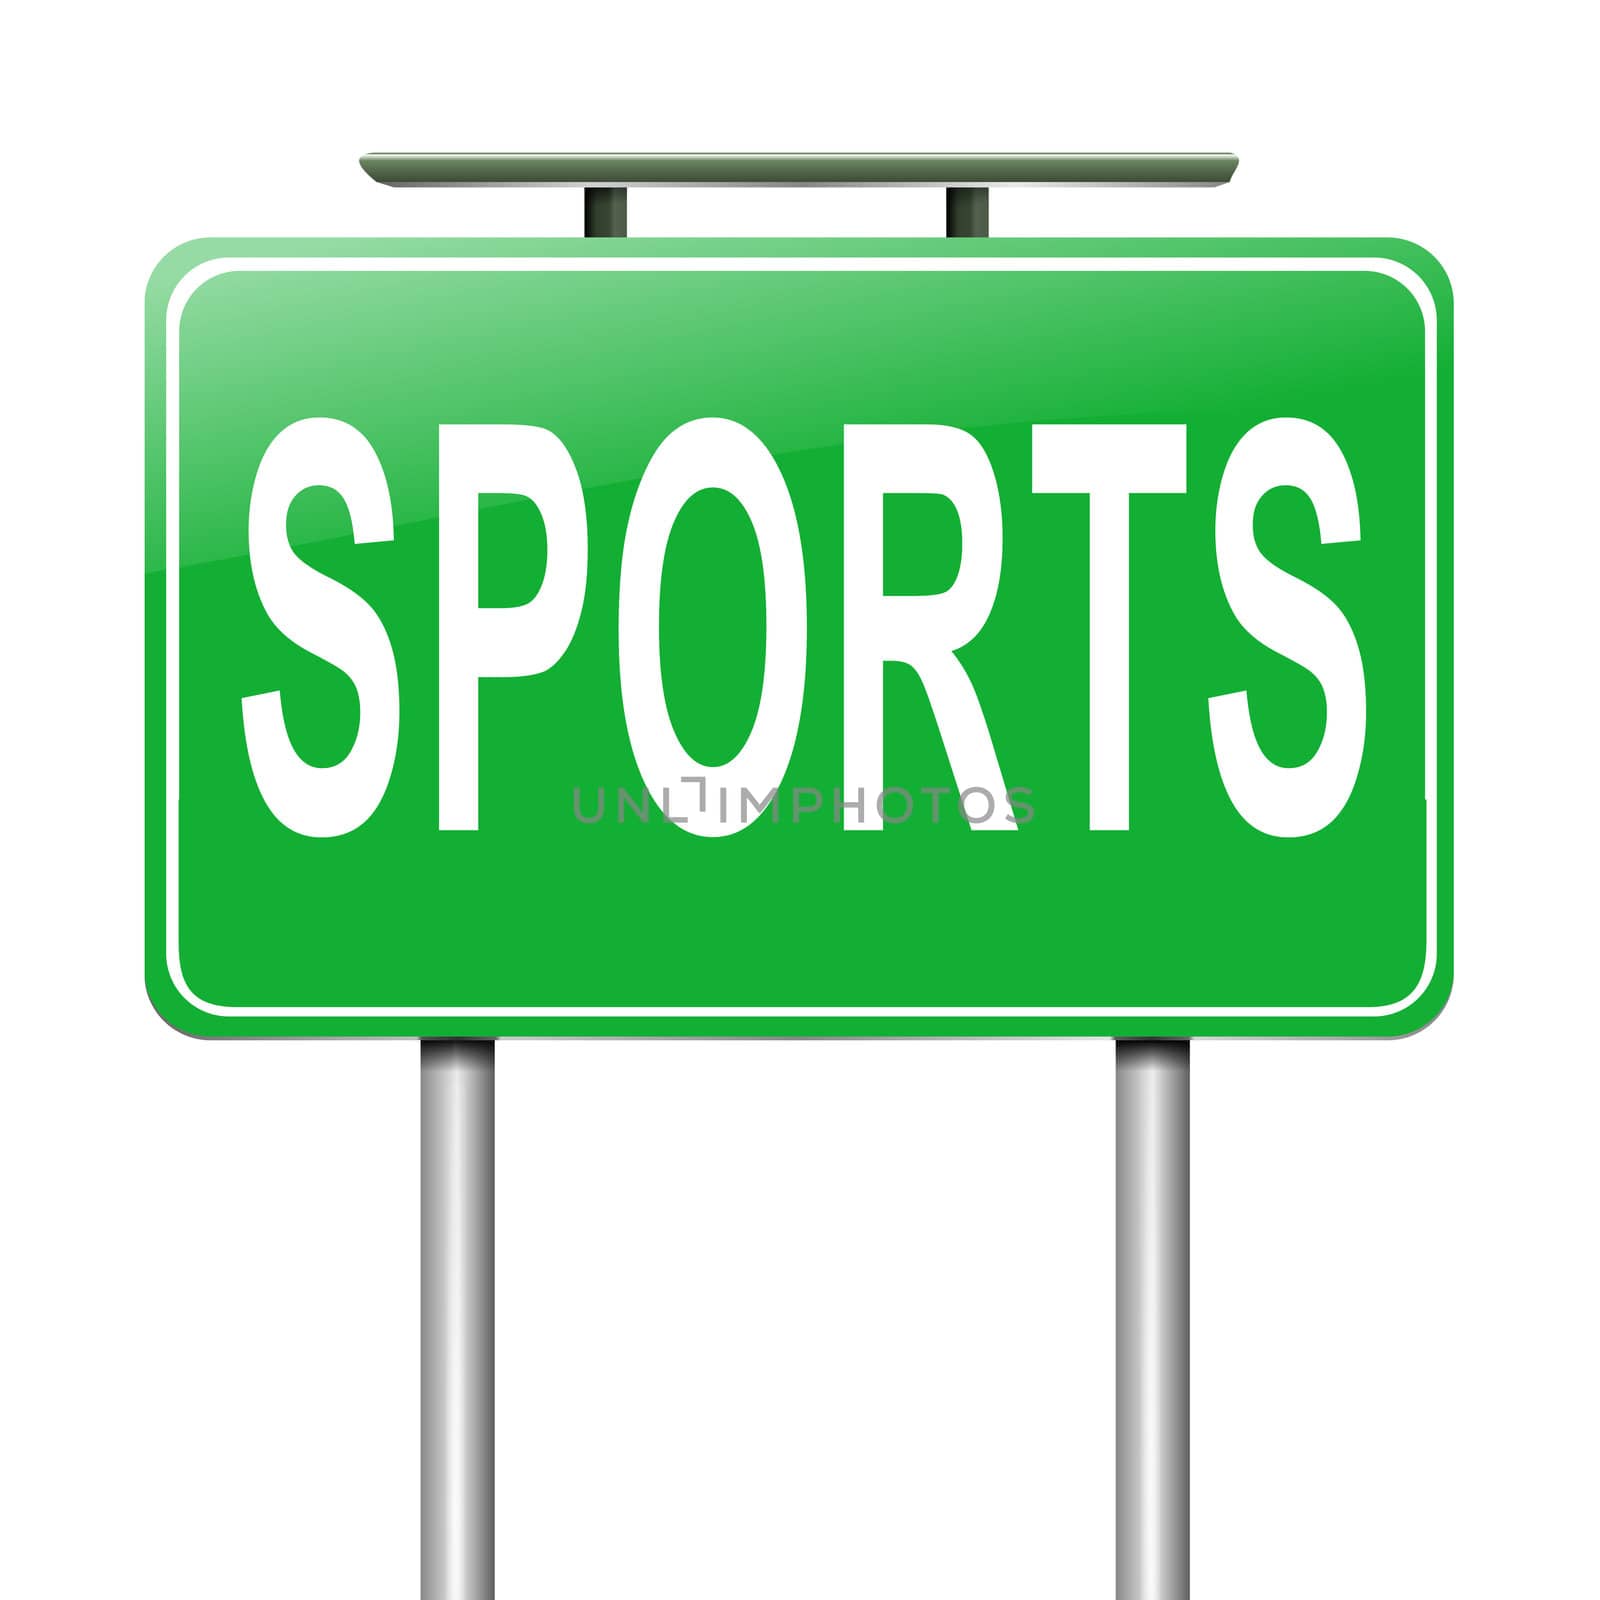 Illustration depicting a sign with a sports concept.